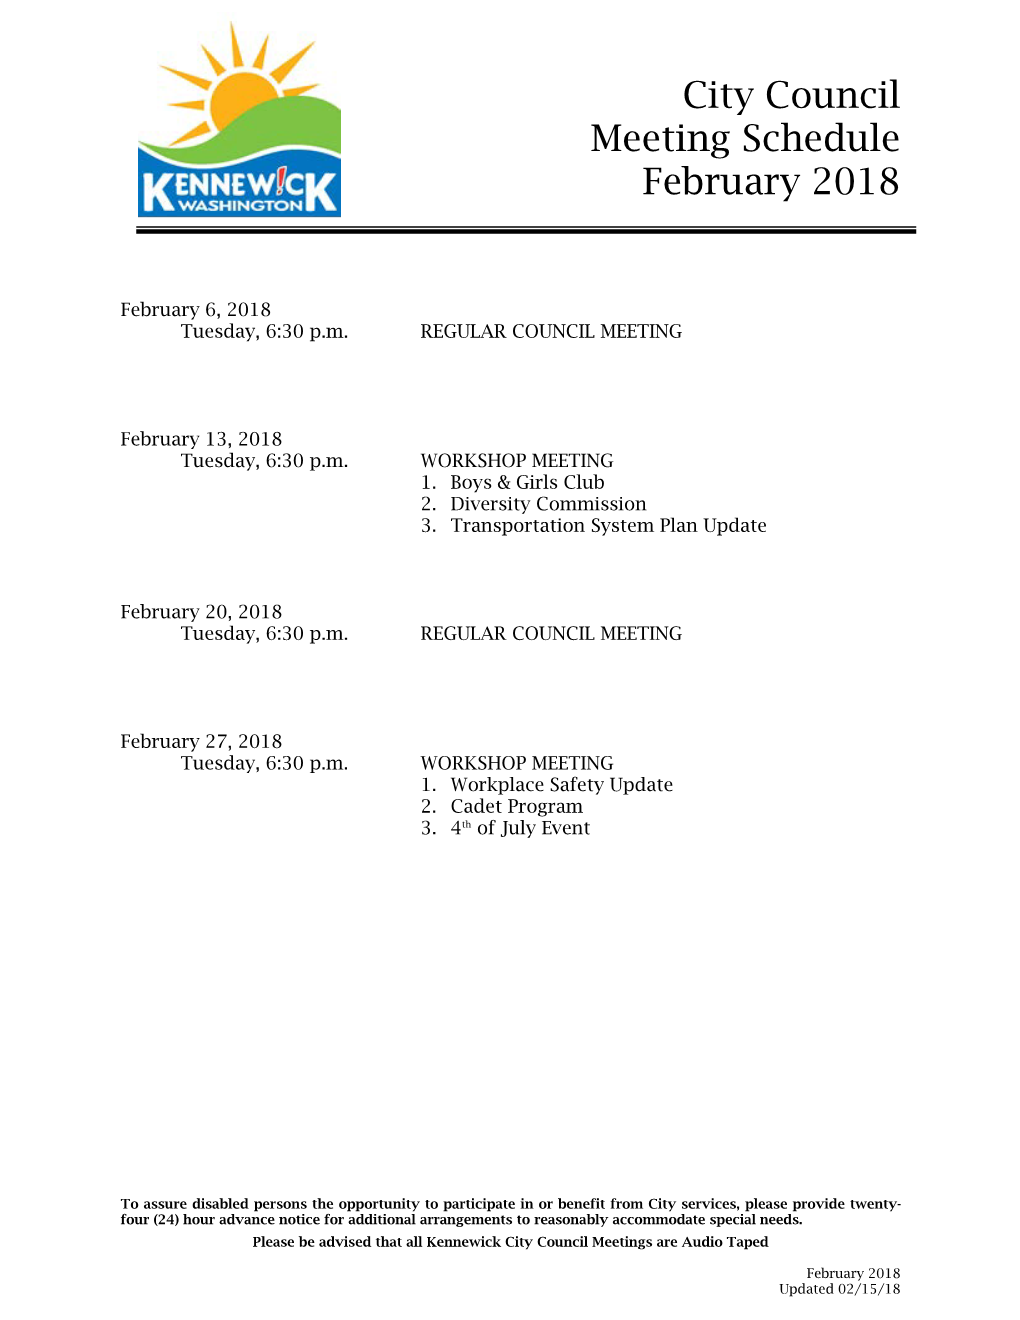 City Council Meeting Schedule February 2018